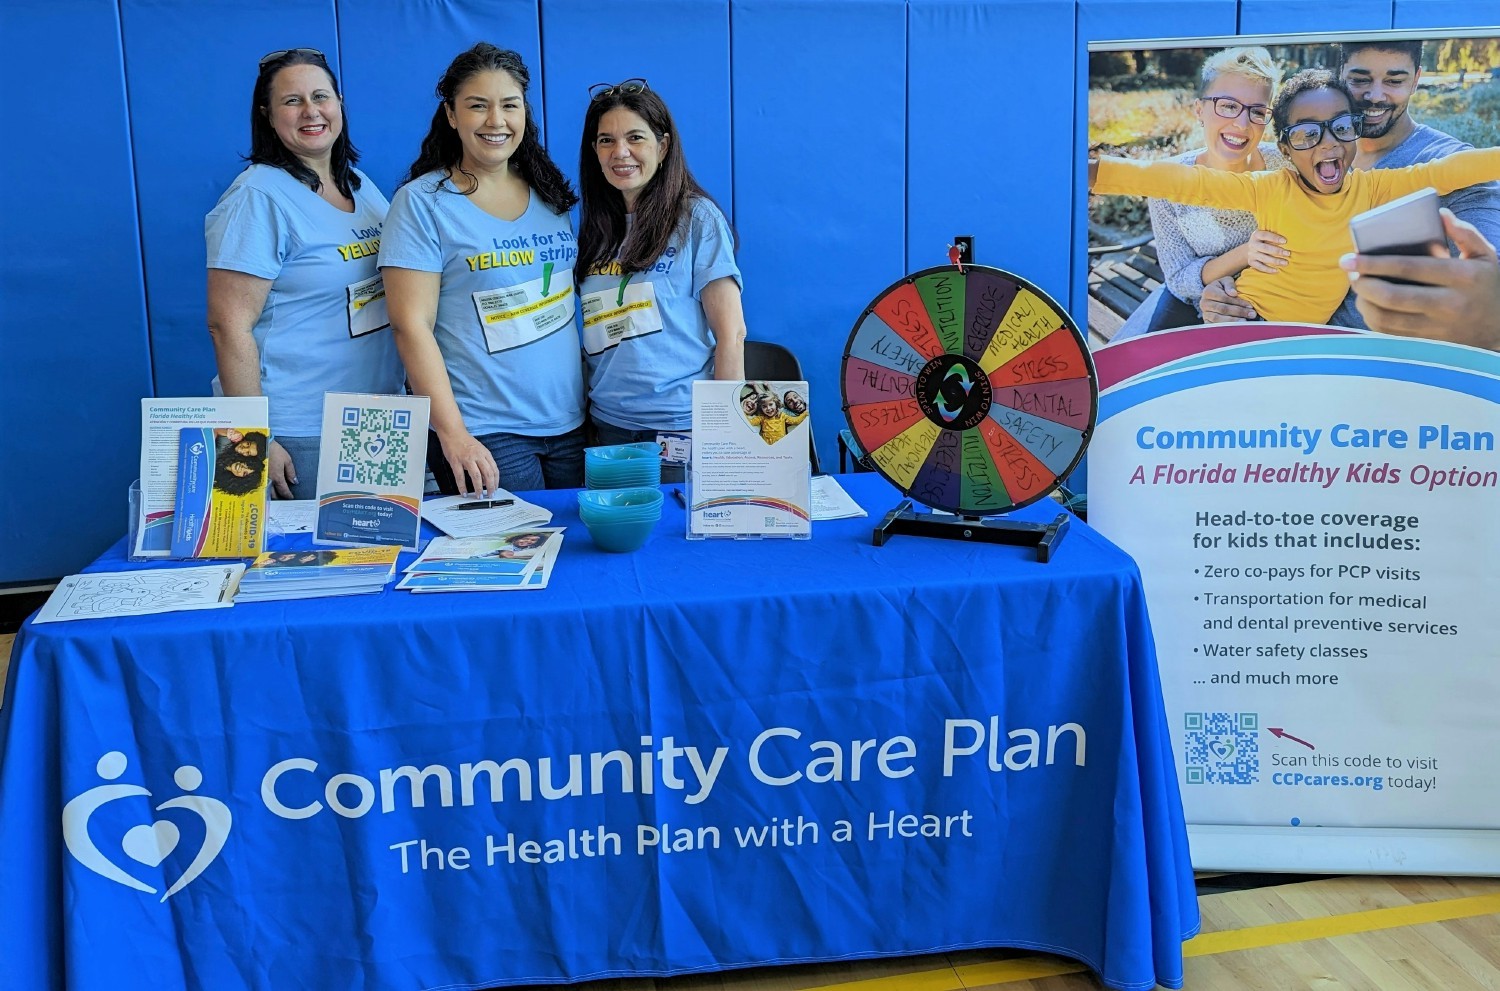 We're grateful to our Community Care Plan employees for donating their time to support the community and attend events.